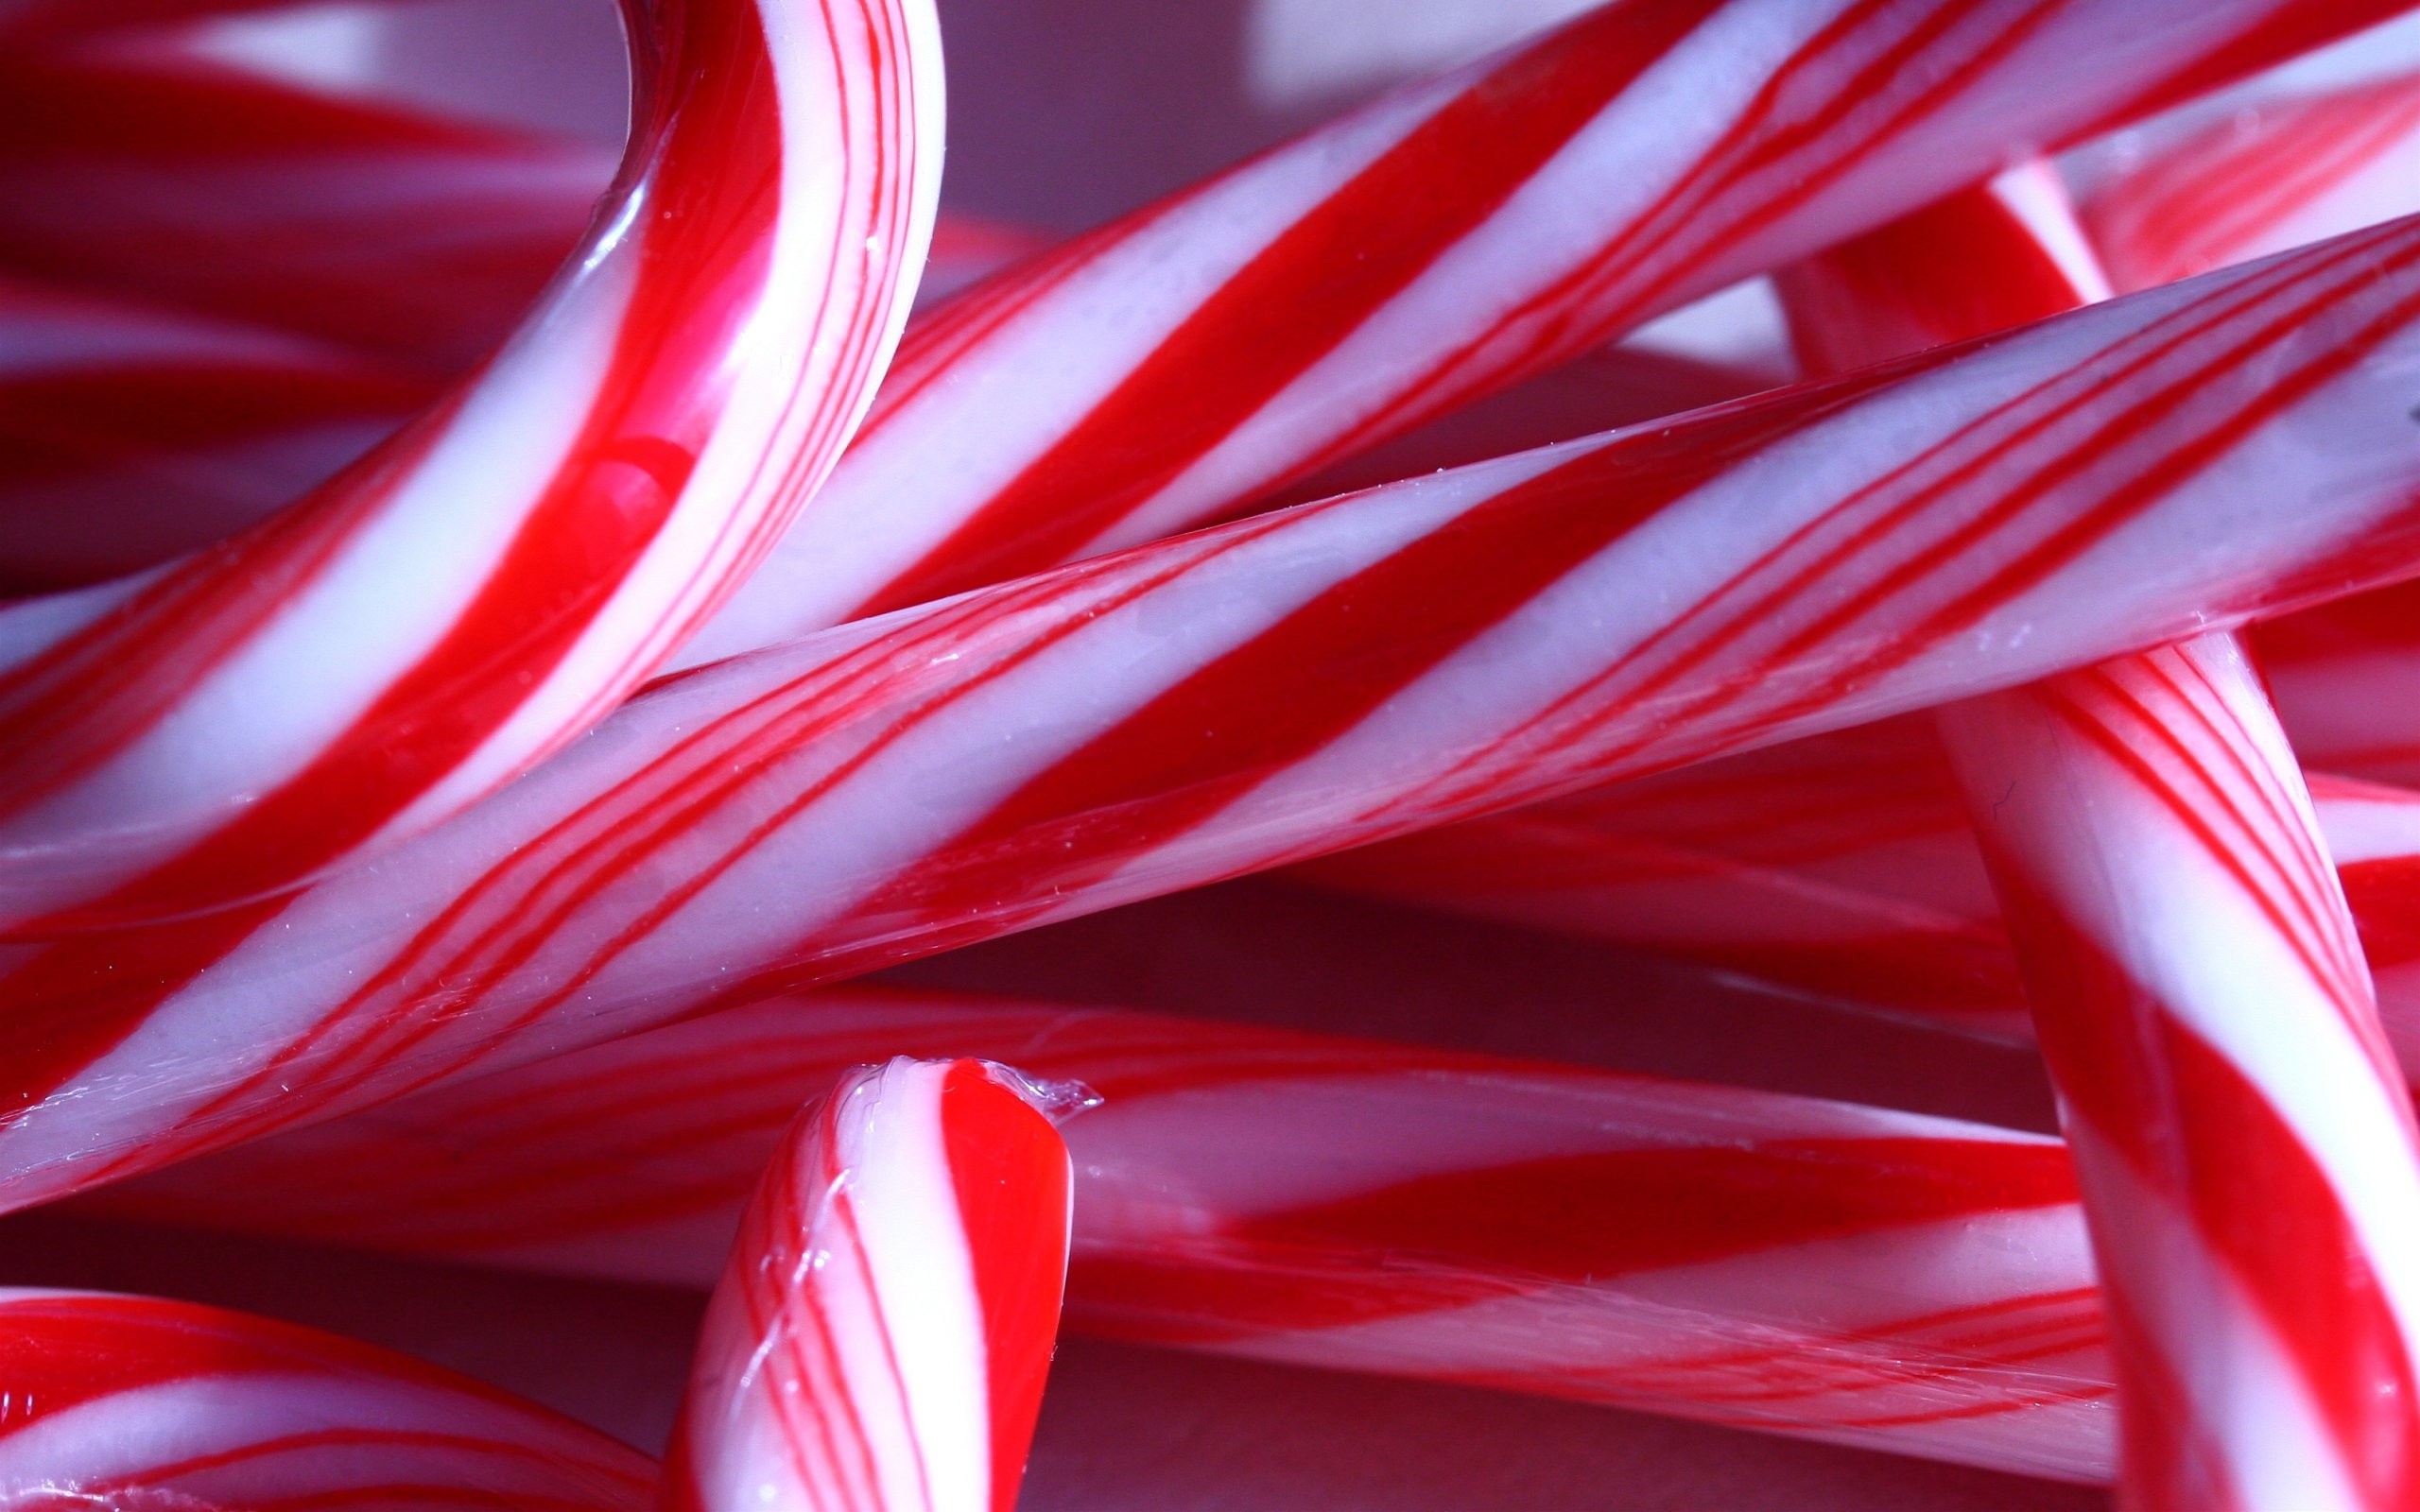 2560x1600 candy cane up close wallpaper background 52139